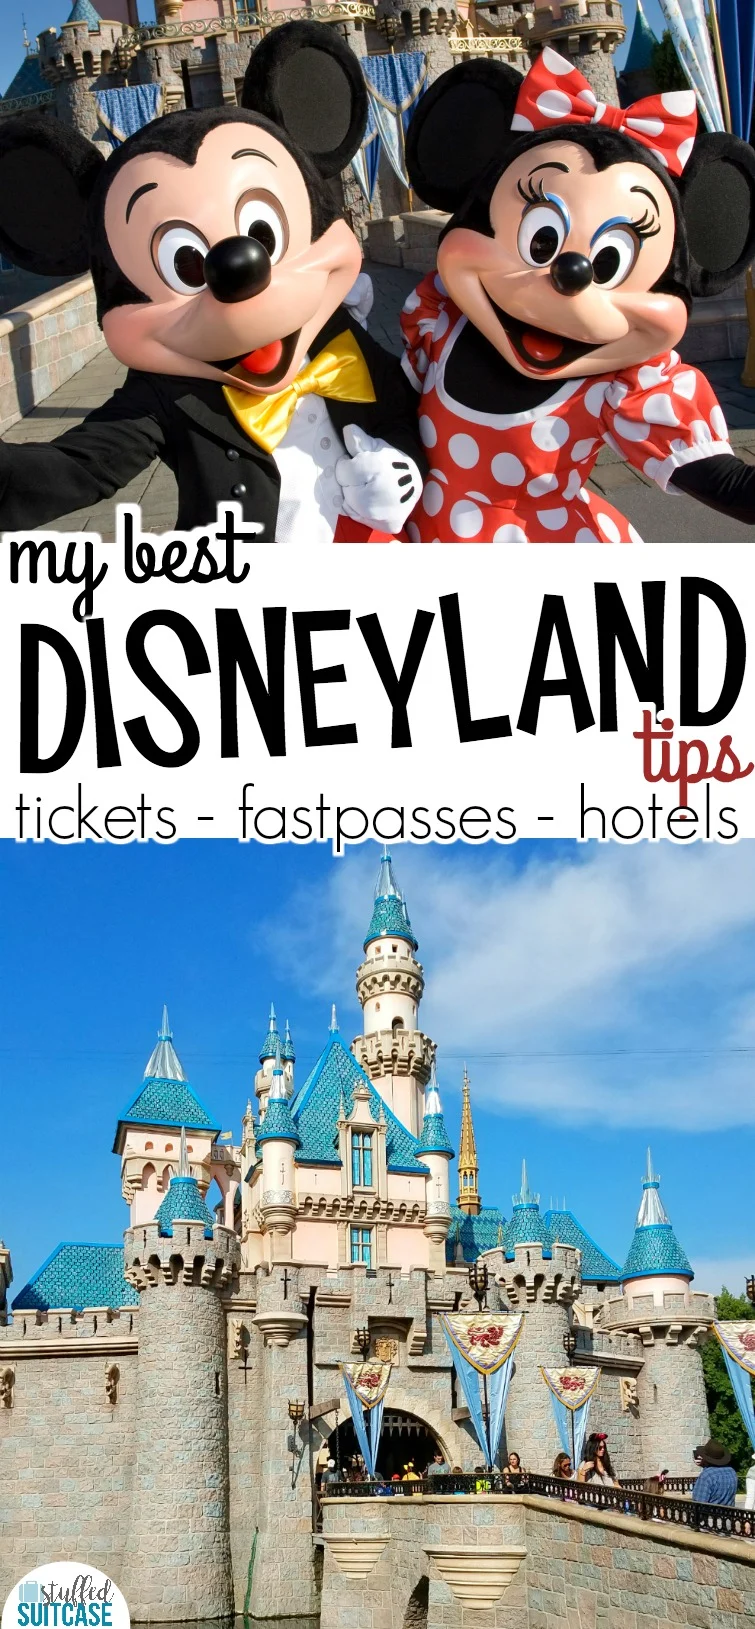 Looking for some Disneyland secrets? Here are my best Disneyland tips to help you plan a magical vacation!